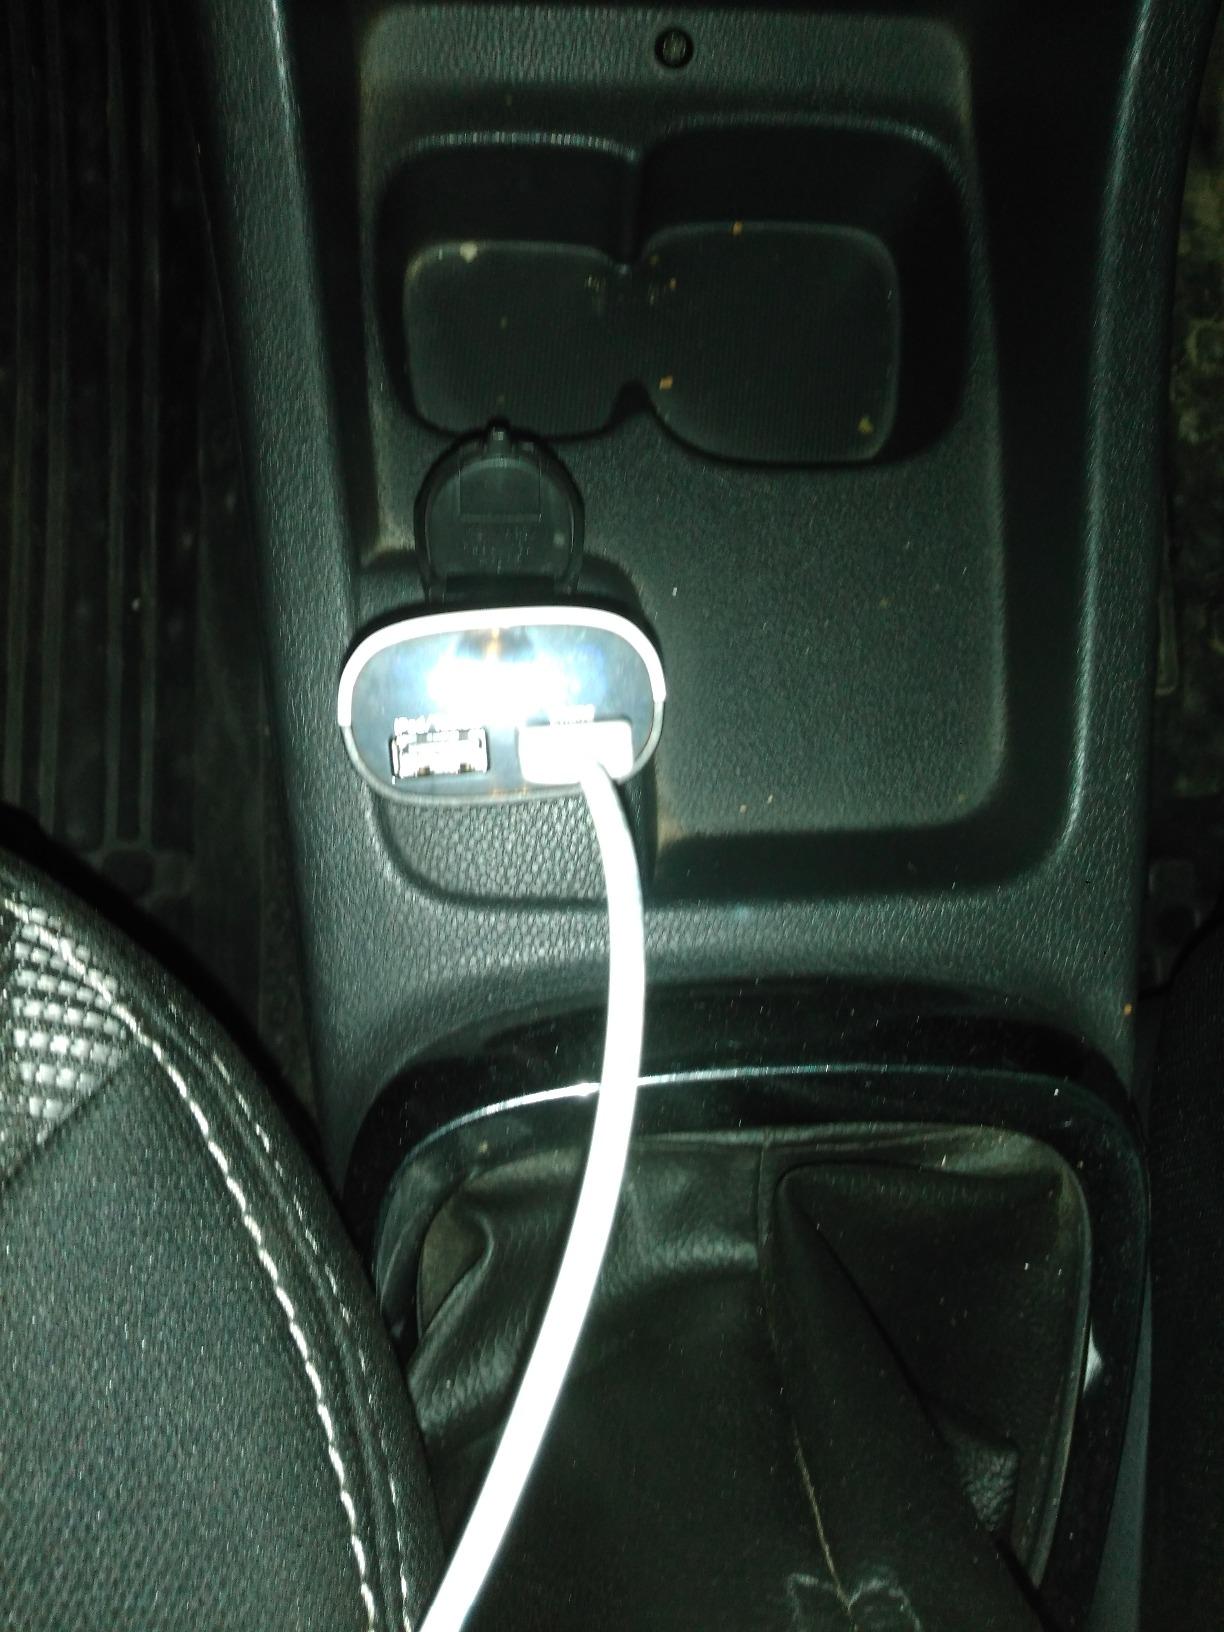 Dual USB Car Charger with LED Display - Safely Charge Your Devices on the Go photo review